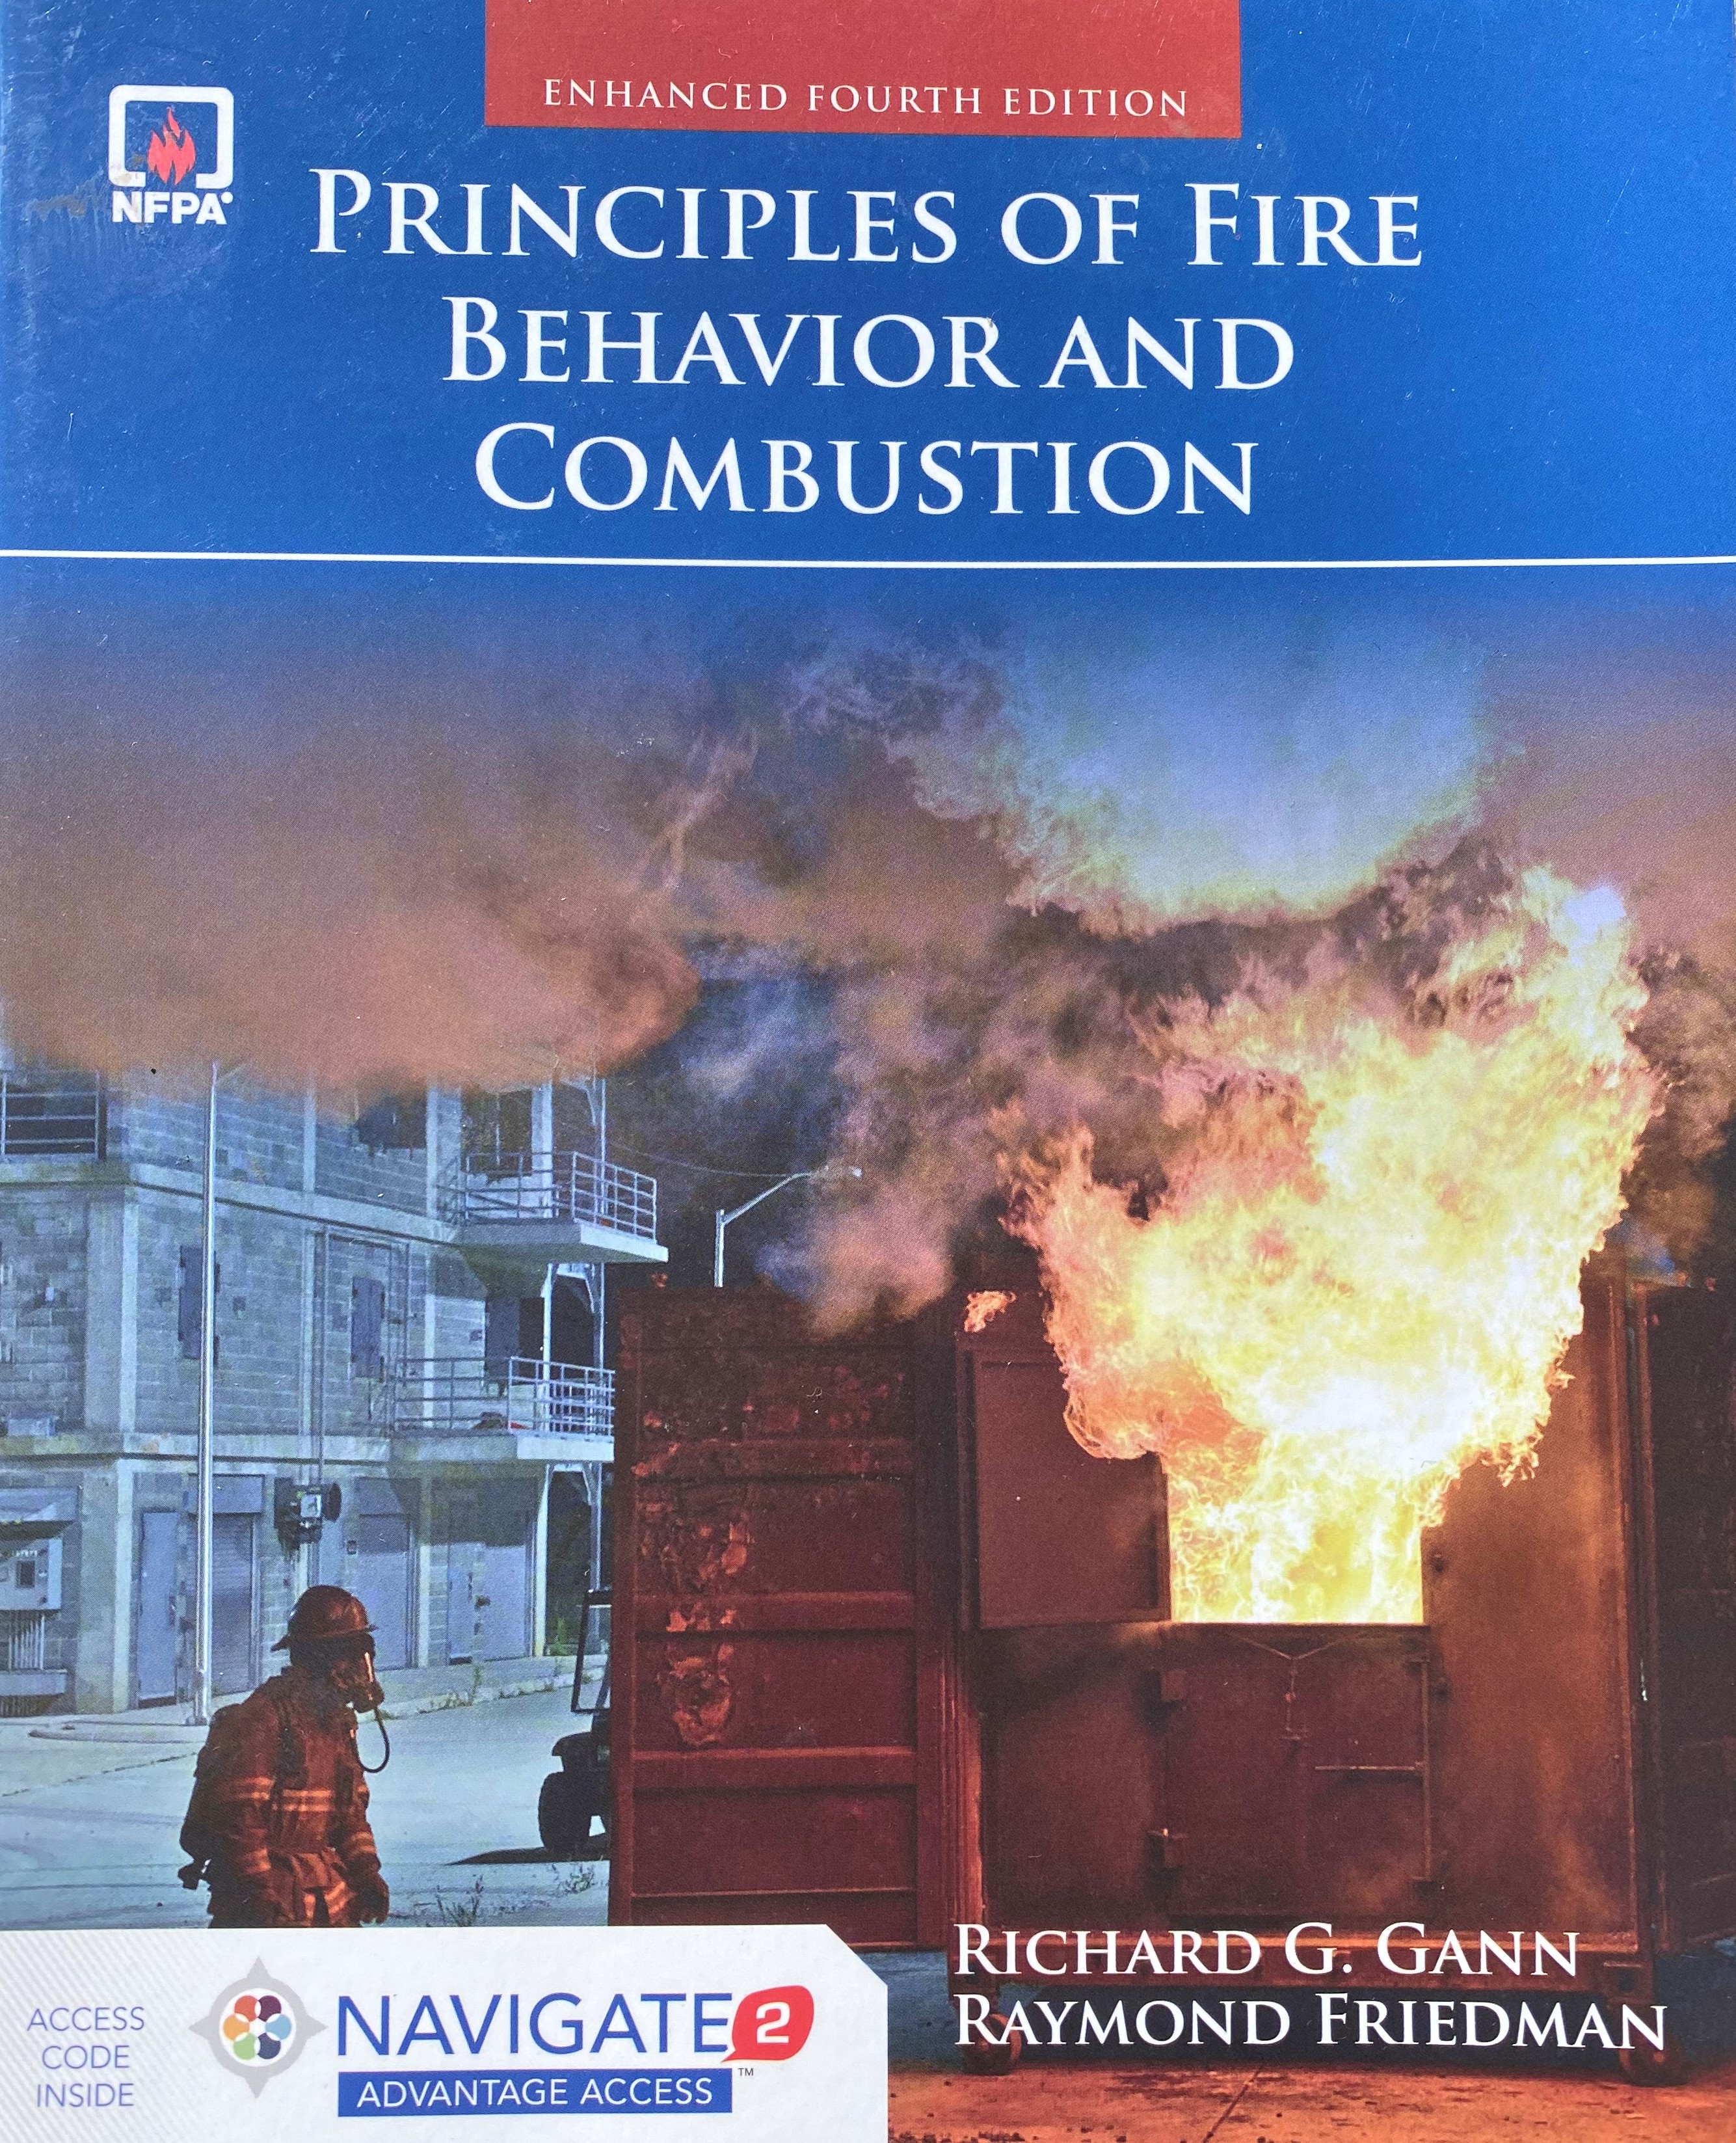 Image of the textbook Front cover of the Enhanced Fourth Edition